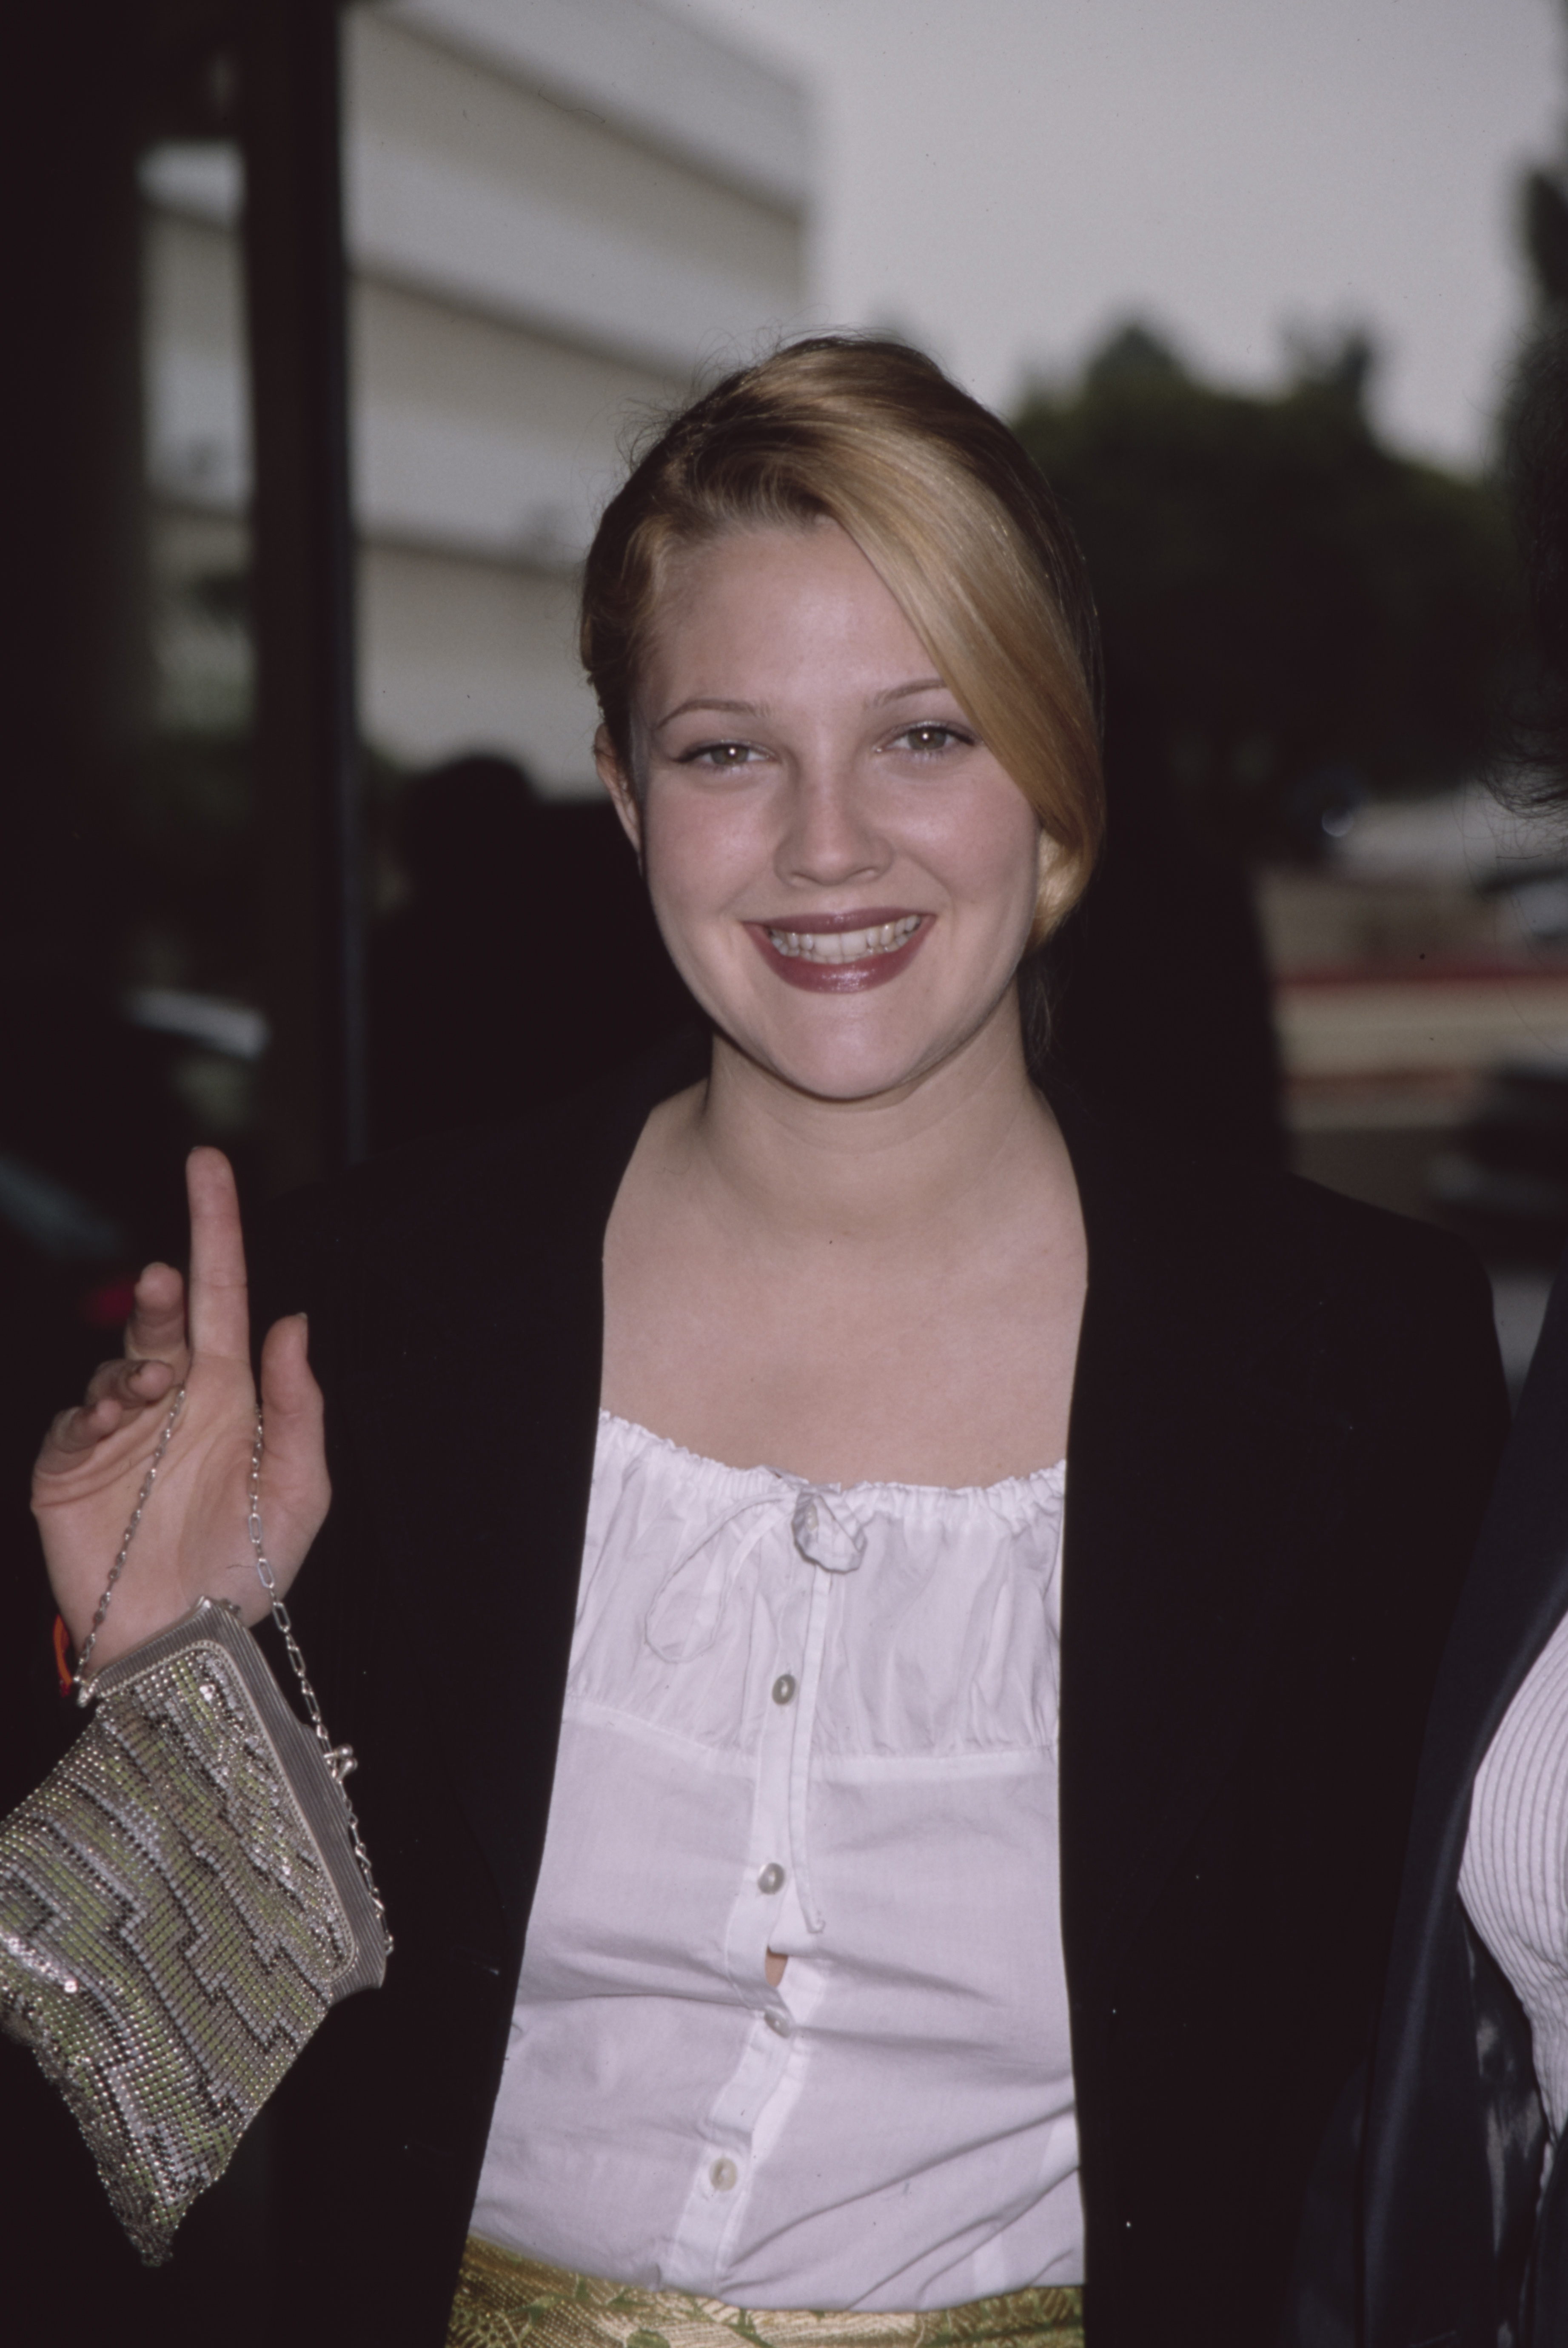 Drew Barrymore in Beverly Hills, California, June 11, 1999. | Source: Getty Images